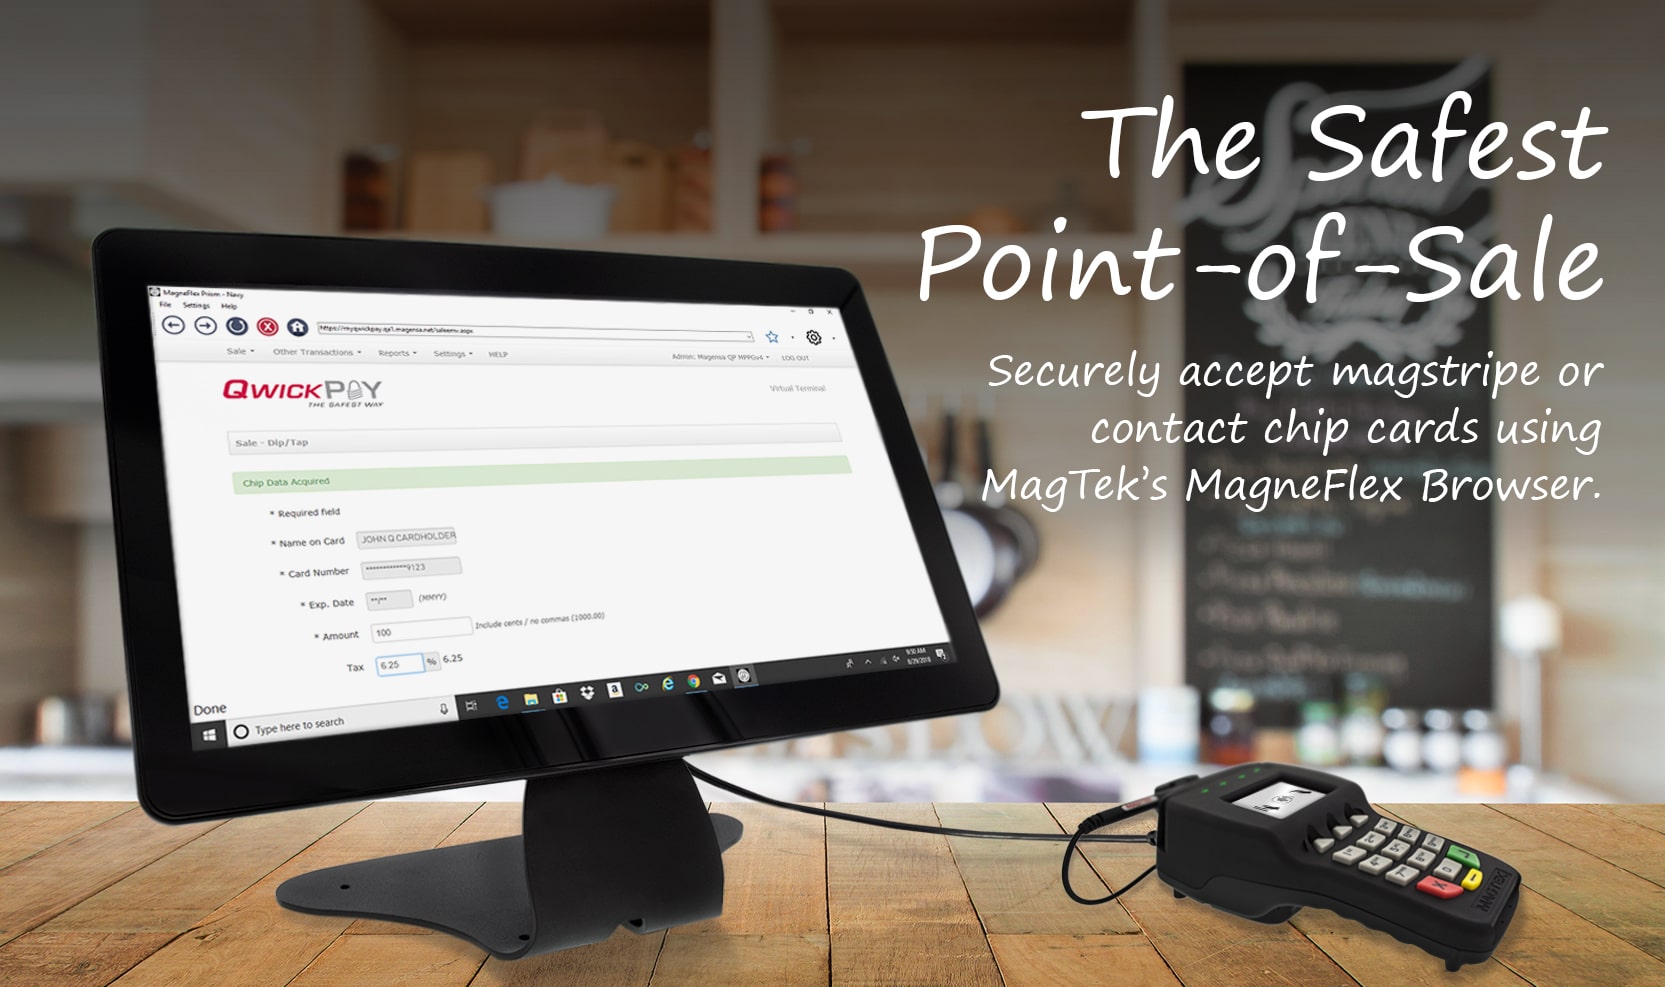 QwickPAY The Safest Point-of-Sale